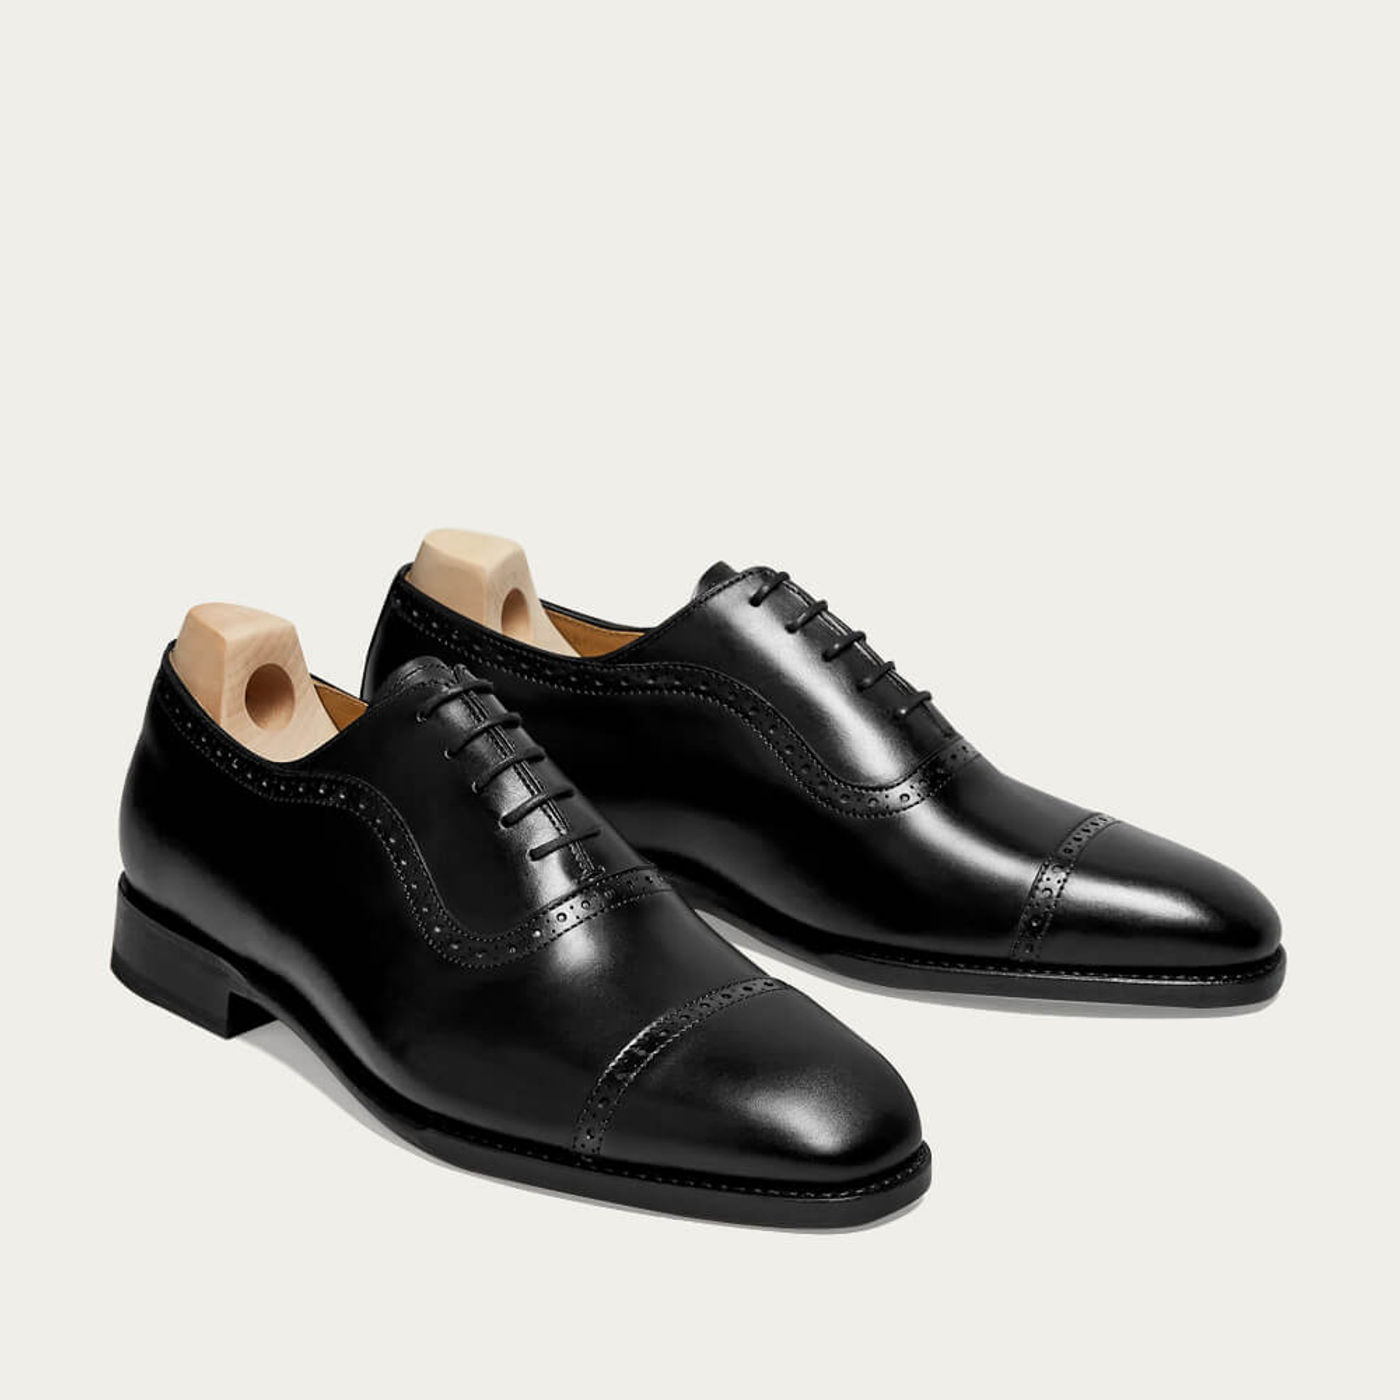 Black Skytteholm Calf Oxfords with Leather Sole | Bombinate